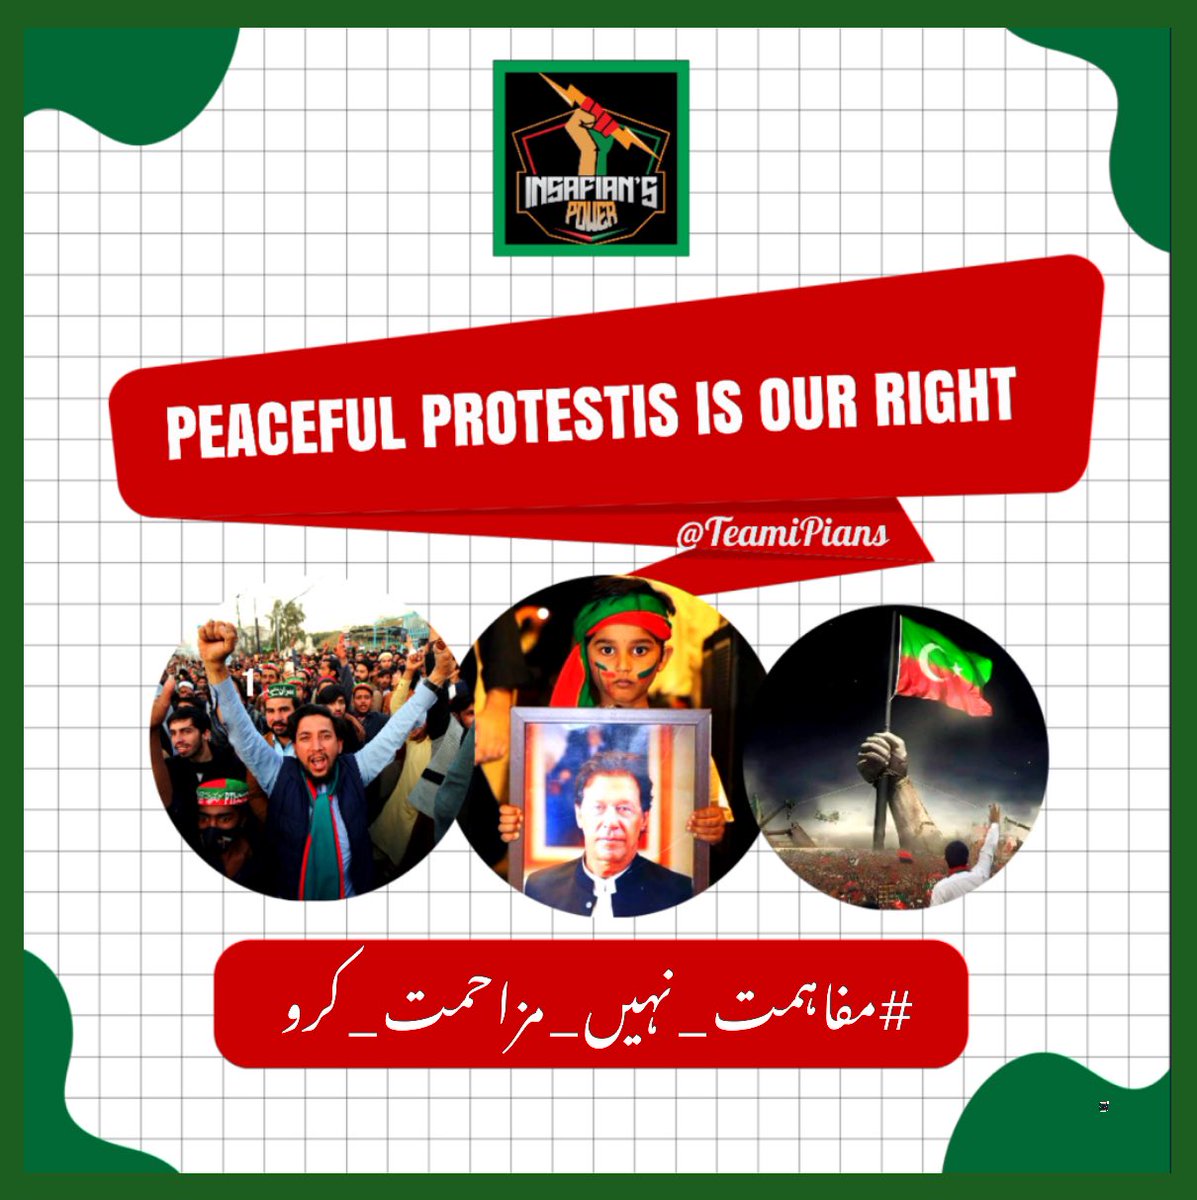 Peaceful protest is our right, but remember, peaceful protest never brings Imran Khan back. Non-stop protests and strikes are the only solution. @PTIofficial #مفاہمت_نہیں_مزاحمت_کرو @TeamiPians #کسانوں_کا_استحصال_بند_کرو